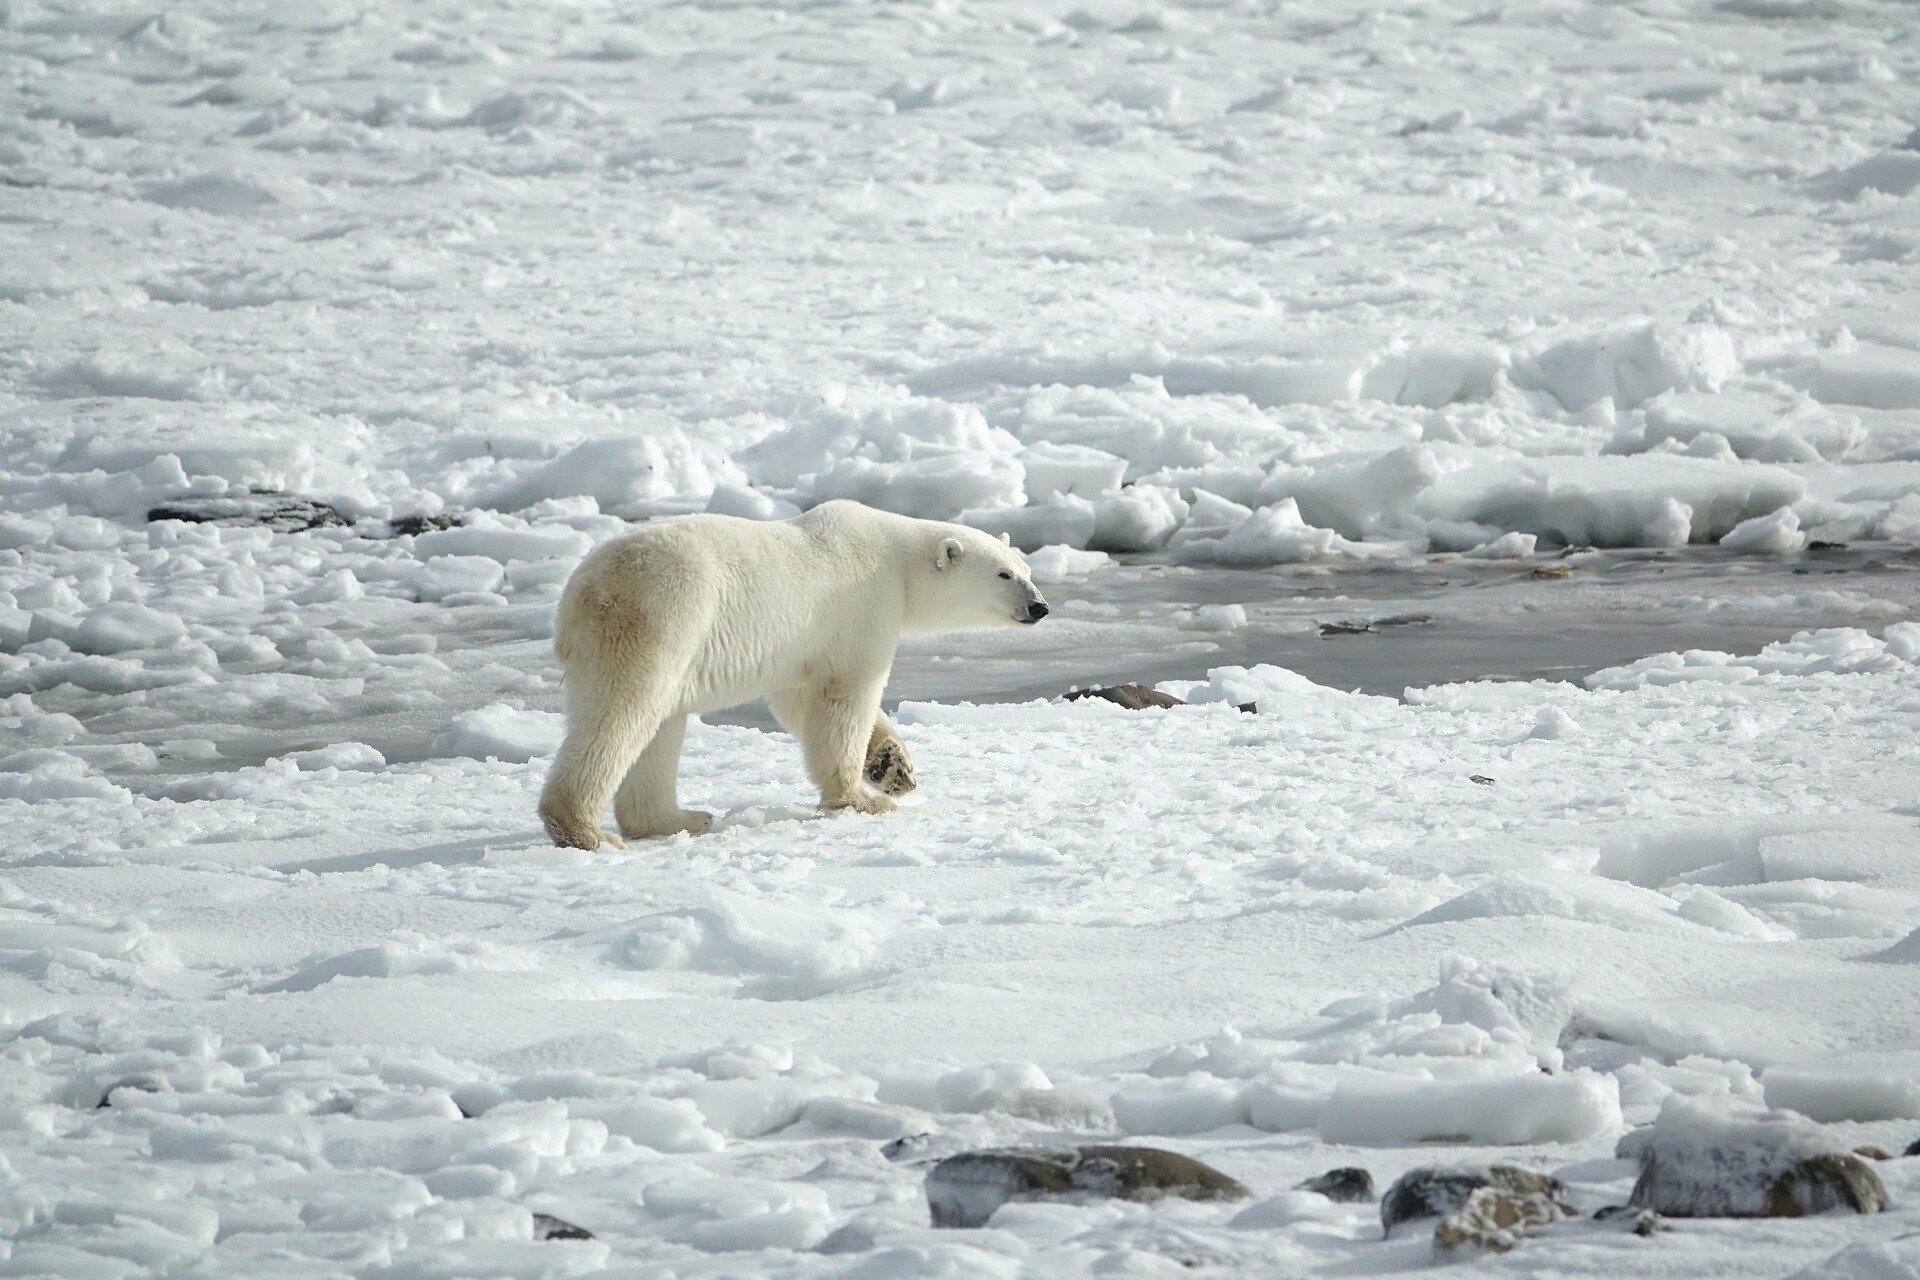 For 20,000 years, polar bears have been retreating due to rising